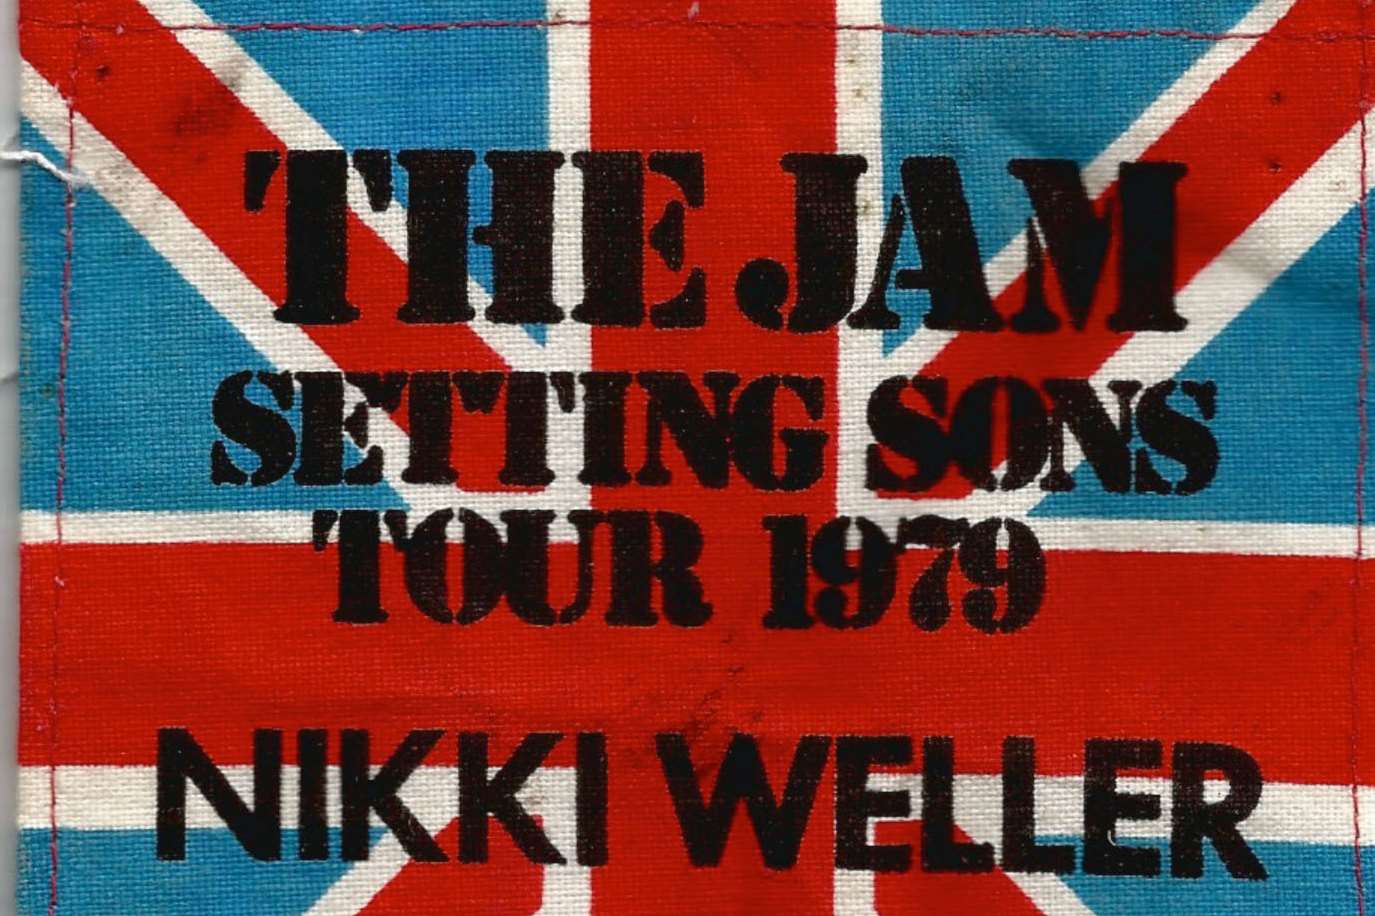 Nicky Weller's backstage pass from a 1979 Jam tour.